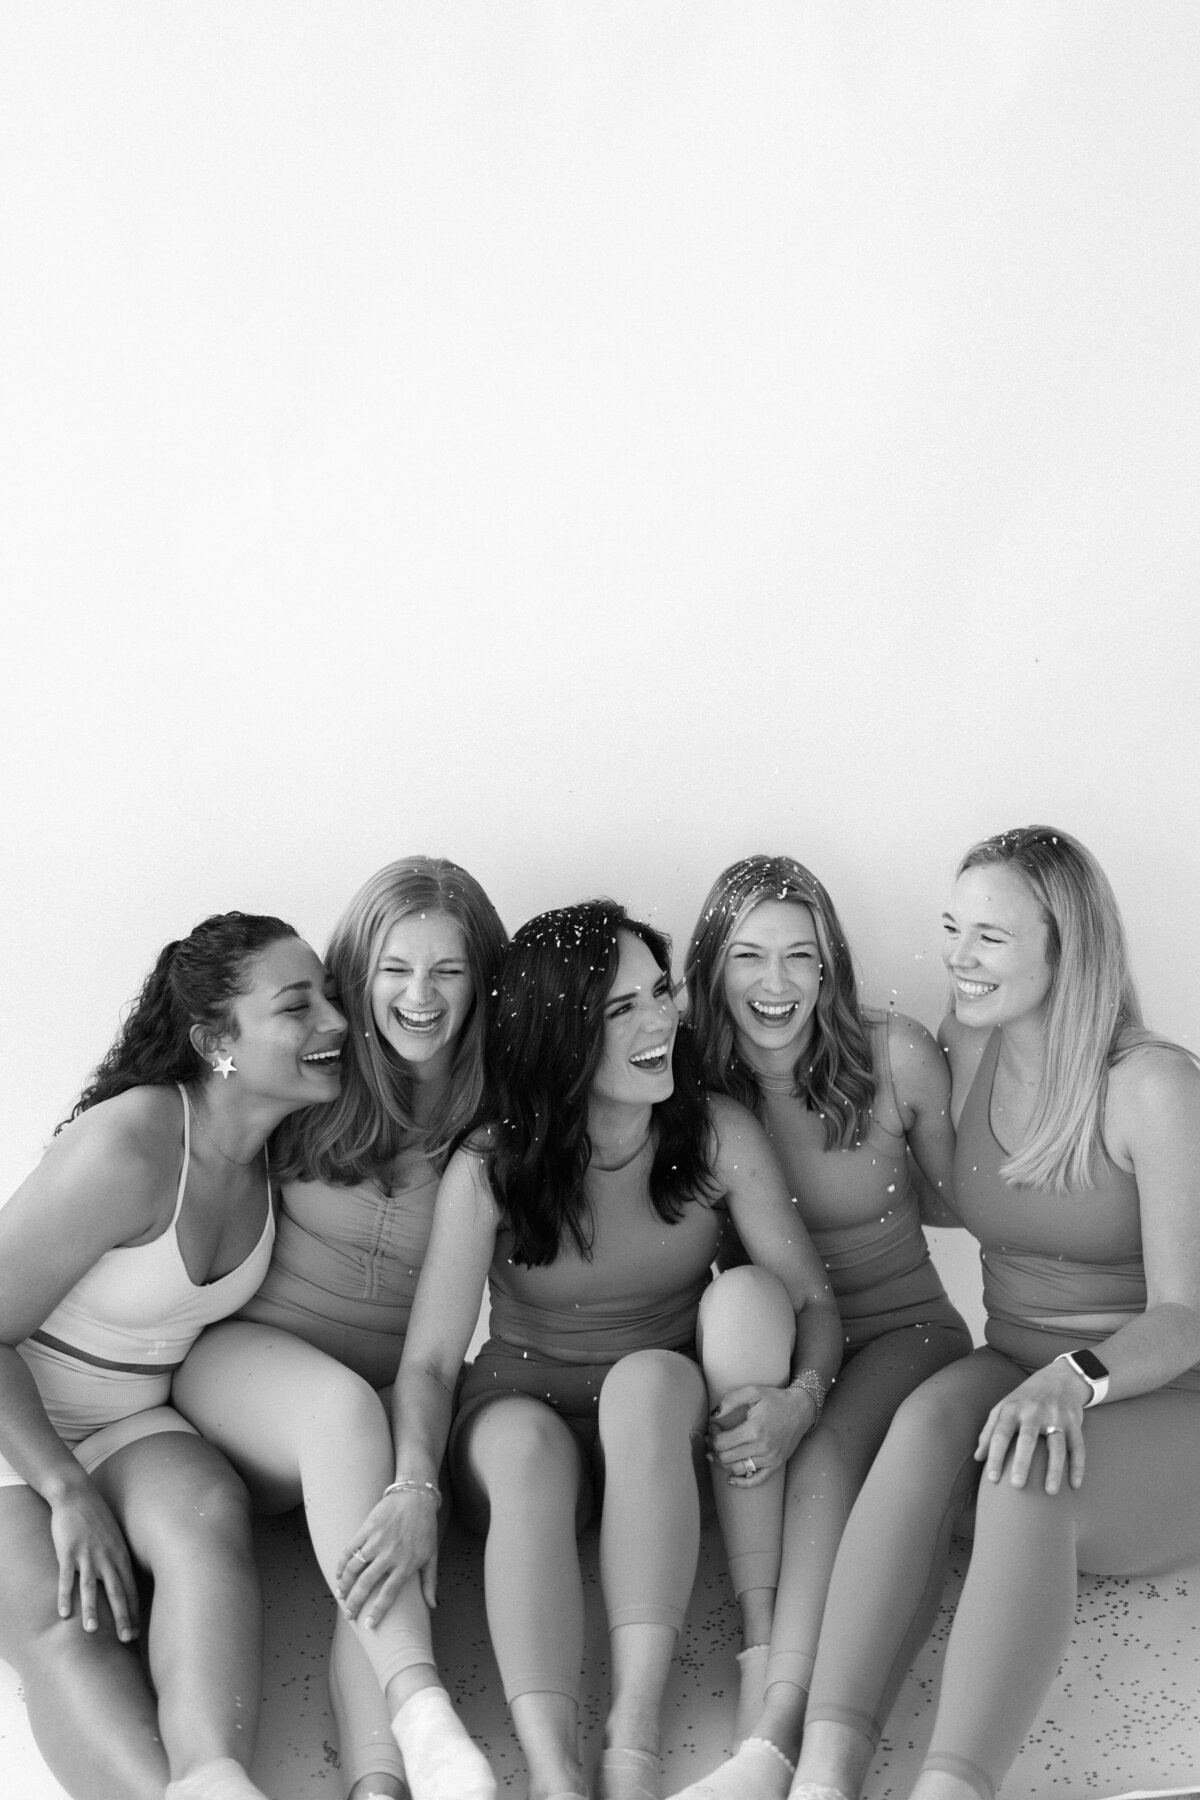 Women smiling and hugging while sitting on the floor